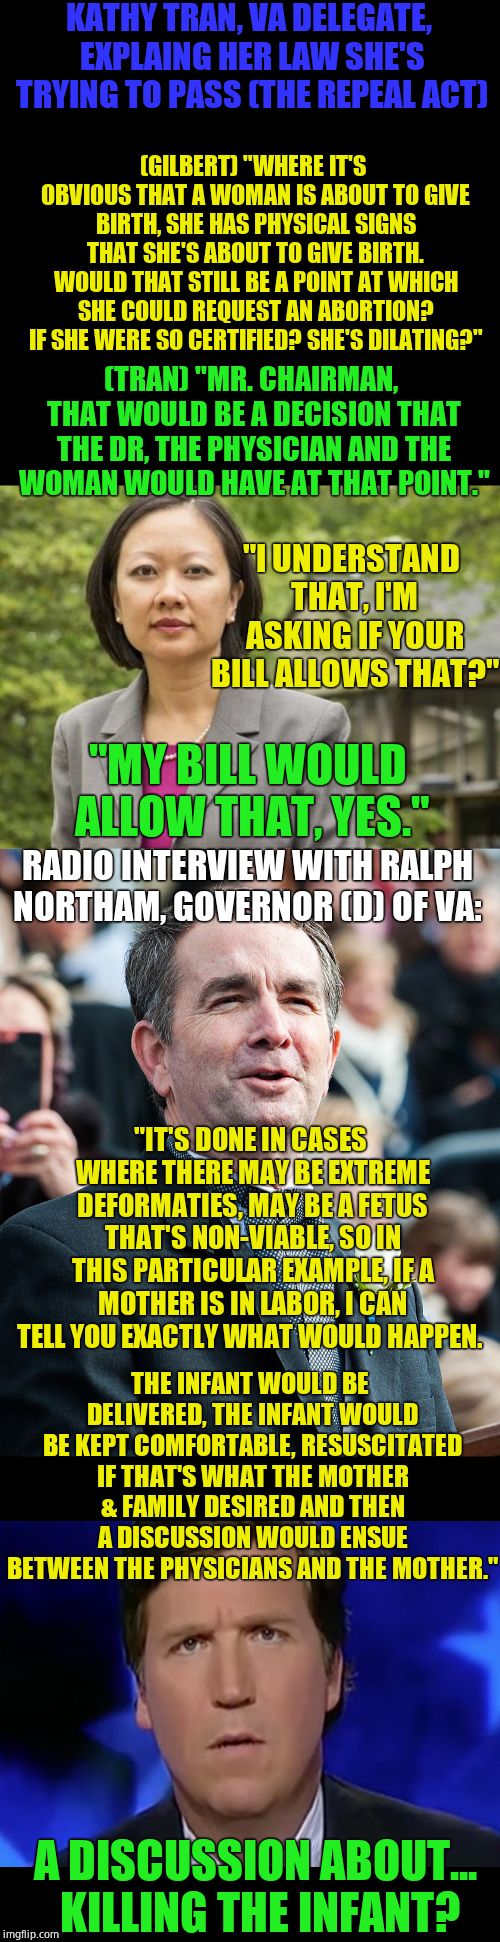 Virginia is trying do outdo NY. Remember when you were told the slippery slope argument was untrue? | KATHY TRAN, VA DELEGATE, EXPLAING HER LAW SHE'S TRYING TO PASS (THE REPEAL ACT); (GILBERT) "WHERE IT'S OBVIOUS THAT A WOMAN IS ABOUT TO GIVE BIRTH, SHE HAS PHYSICAL SIGNS THAT SHE'S ABOUT TO GIVE BIRTH. WOULD THAT STILL BE A POINT AT WHICH SHE COULD REQUEST AN ABORTION? IF SHE WERE SO CERTIFIED? SHE'S DILATING?"; (TRAN) "MR. CHAIRMAN, THAT WOULD BE A DECISION THAT THE DR, THE PHYSICIAN AND THE WOMAN WOULD HAVE AT THAT POINT."; "I UNDERSTAND THAT, I'M ASKING IF YOUR BILL ALLOWS THAT?"; "MY BILL WOULD ALLOW THAT, YES."; RADIO INTERVIEW WITH RALPH NORTHAM, GOVERNOR (D) OF VA:; "IT'S DONE IN CASES WHERE THERE MAY BE EXTREME DEFORMATIES, MAY BE A FETUS THAT'S NON-VIABLE, SO IN THIS PARTICULAR EXAMPLE, IF A MOTHER IS IN LABOR, I CAN TELL YOU EXACTLY WHAT WOULD HAPPEN. THE INFANT WOULD BE DELIVERED, THE INFANT WOULD BE KEPT COMFORTABLE, RESUSCITATED IF THAT'S WHAT THE MOTHER & FAMILY DESIRED AND THEN A DISCUSSION WOULD ENSUE BETWEEN THE PHYSICIANS AND THE MOTHER."; A DISCUSSION ABOUT... KILLING THE INFANT? | image tagged in kt-va,abortion,liberal logic,memes,political memes | made w/ Imgflip meme maker